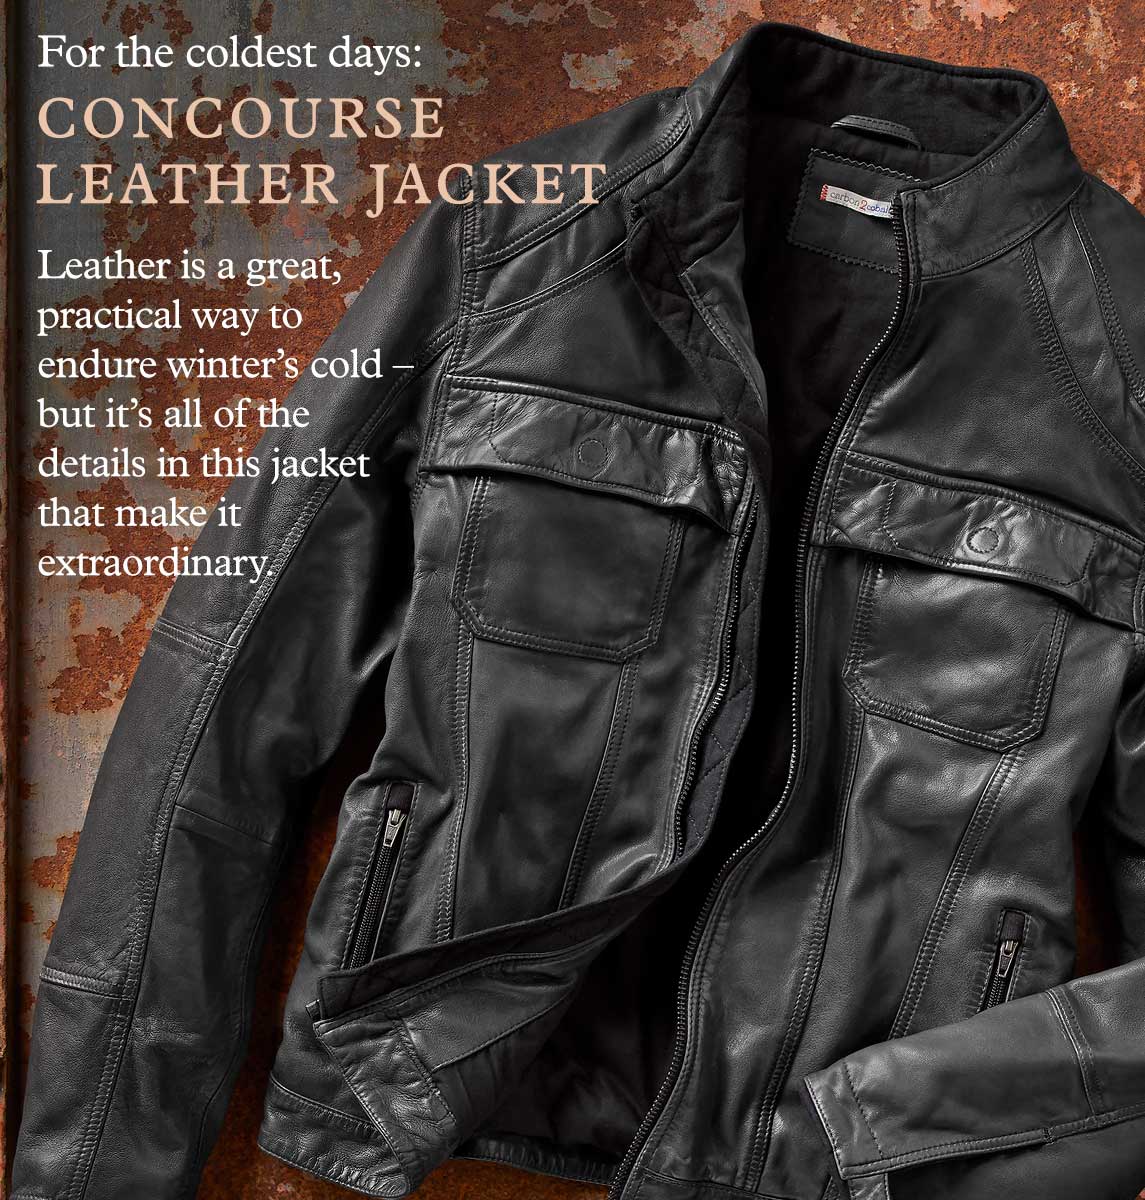 Concourse Leather Jacket